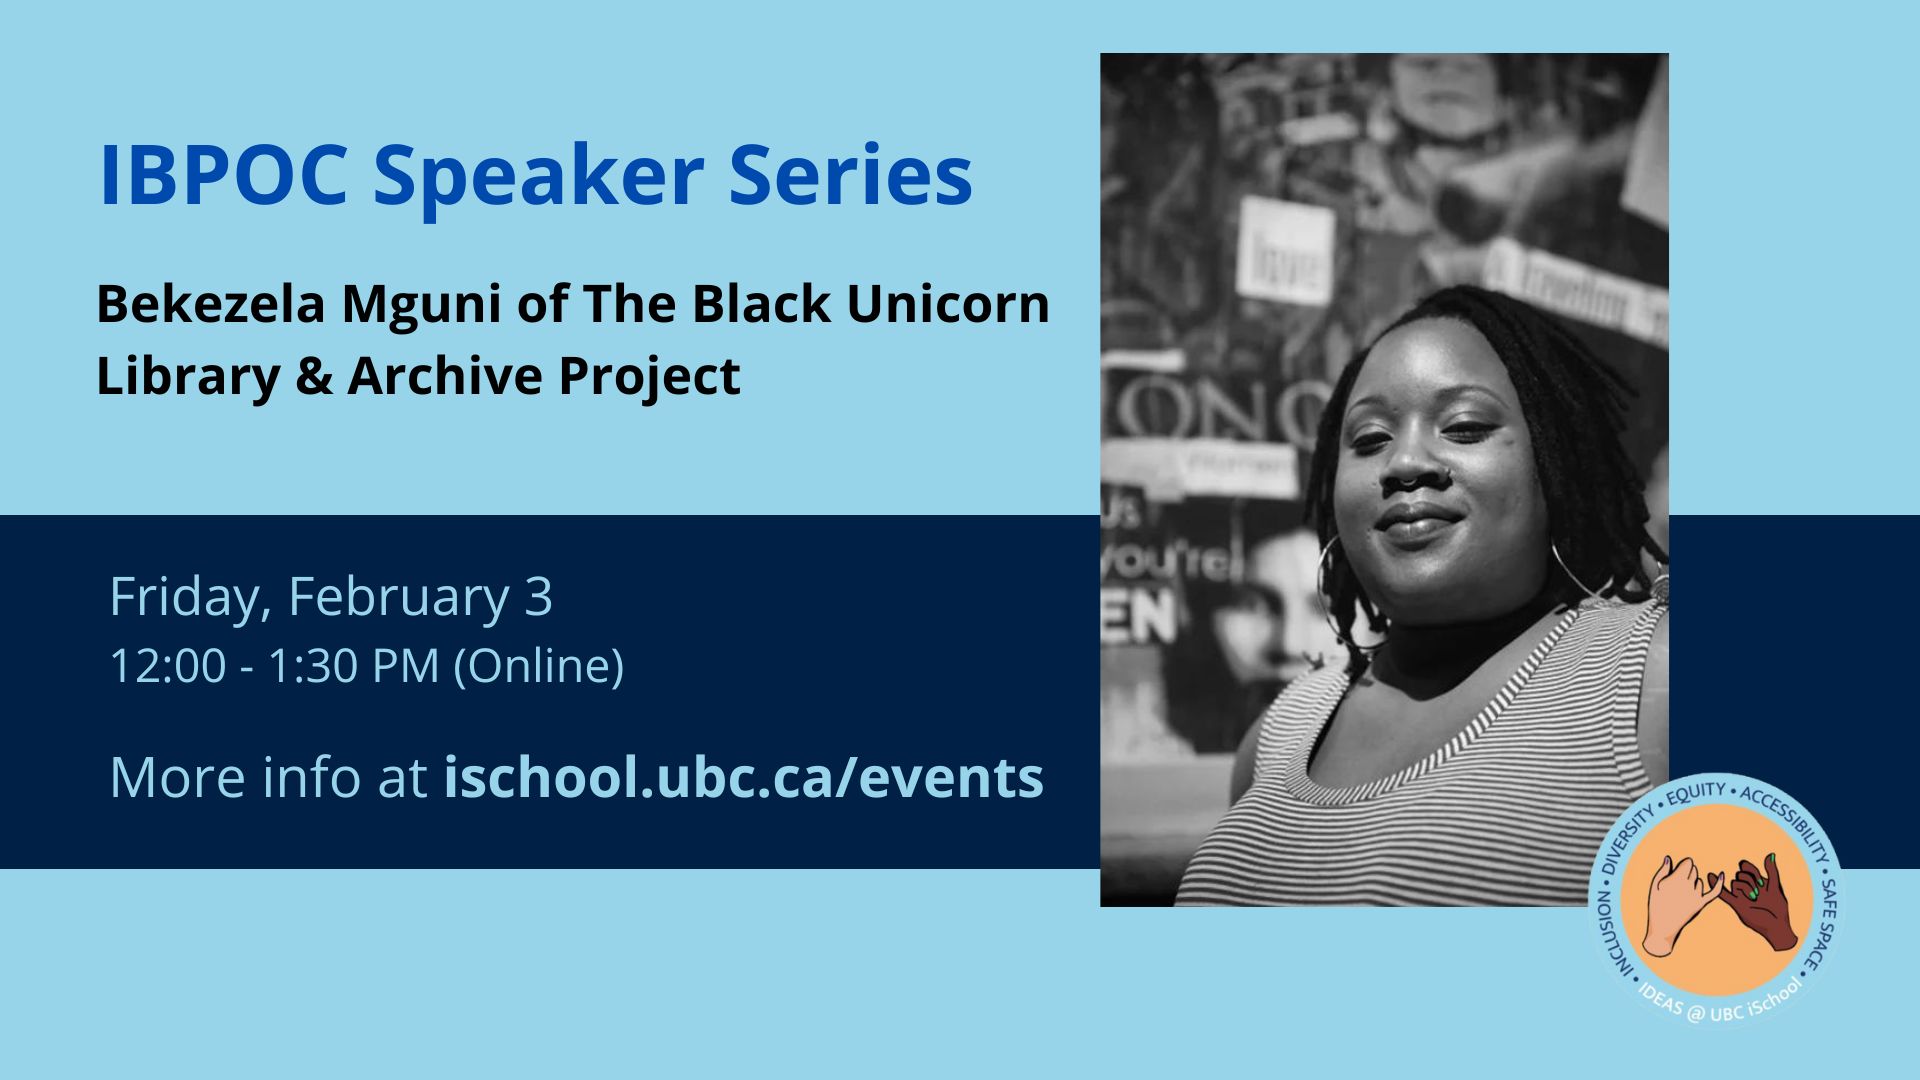 Graphic advertising 'IBPOC Speaker Series: Bekezela Mguni of The Black Unicorn Library & Archive Project'. Friday, January 27. 12:00 - 1:30 PM (Online). More info at ischool.ubc.ca/events. Beside text is a photo of Bekezela Mguni, a smiling Black femme standing in front of a blurred collage art installation. She wears a striped sleeveless shirt, large hoop earrings and a nose ring. The IDEAS@UBC iSchool logo: an illustration of a tan hand and a dark brown hand linking pinkies. The acronym IDEAS is spelled out in a circle around the illustration: 'Inclusion, Diversity, Equity, and Accessibility Safe Space'. 